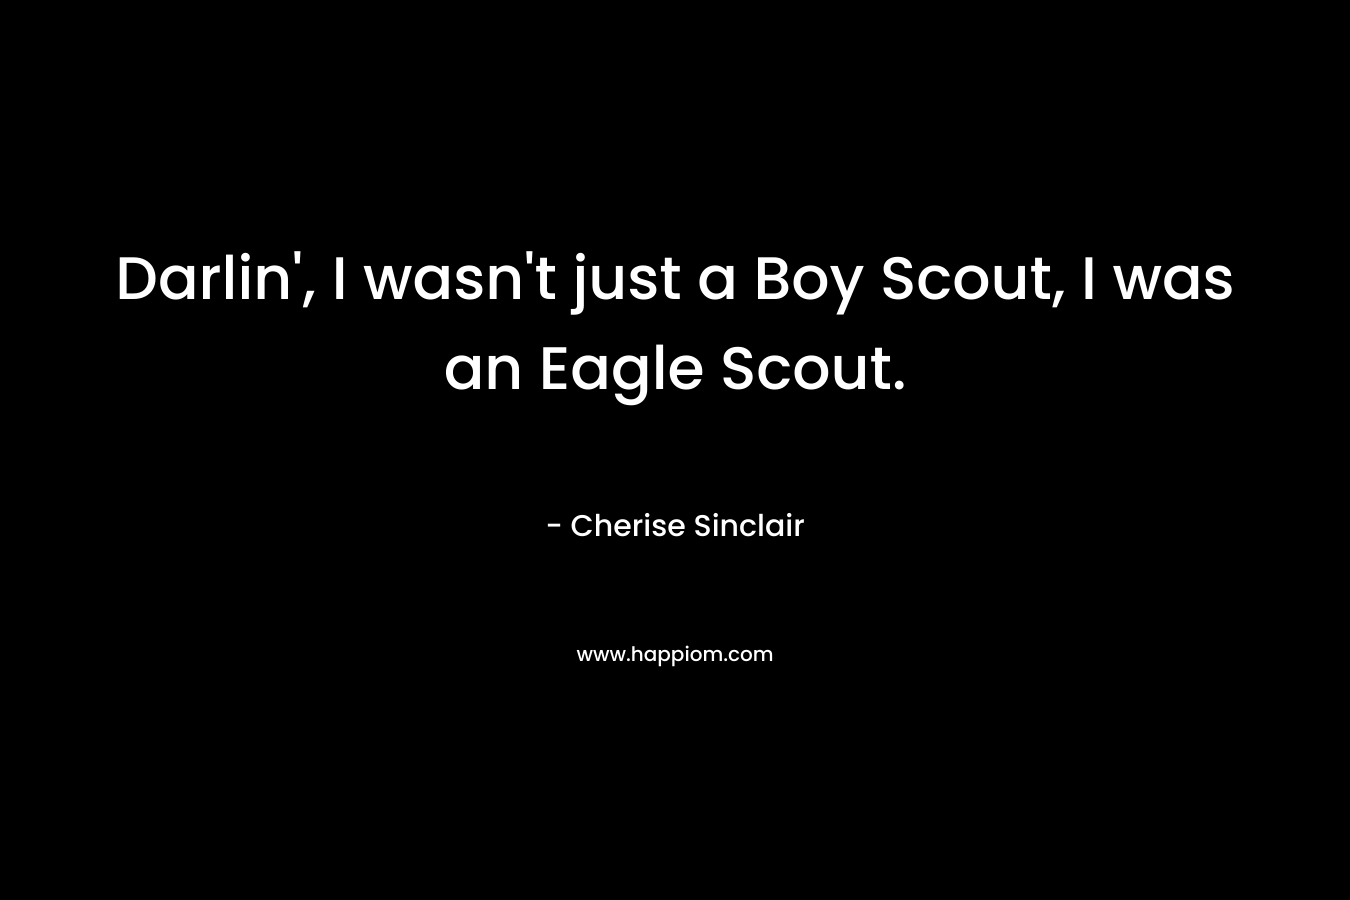 Darlin’, I wasn’t just a Boy Scout, I was an Eagle Scout. – Cherise Sinclair